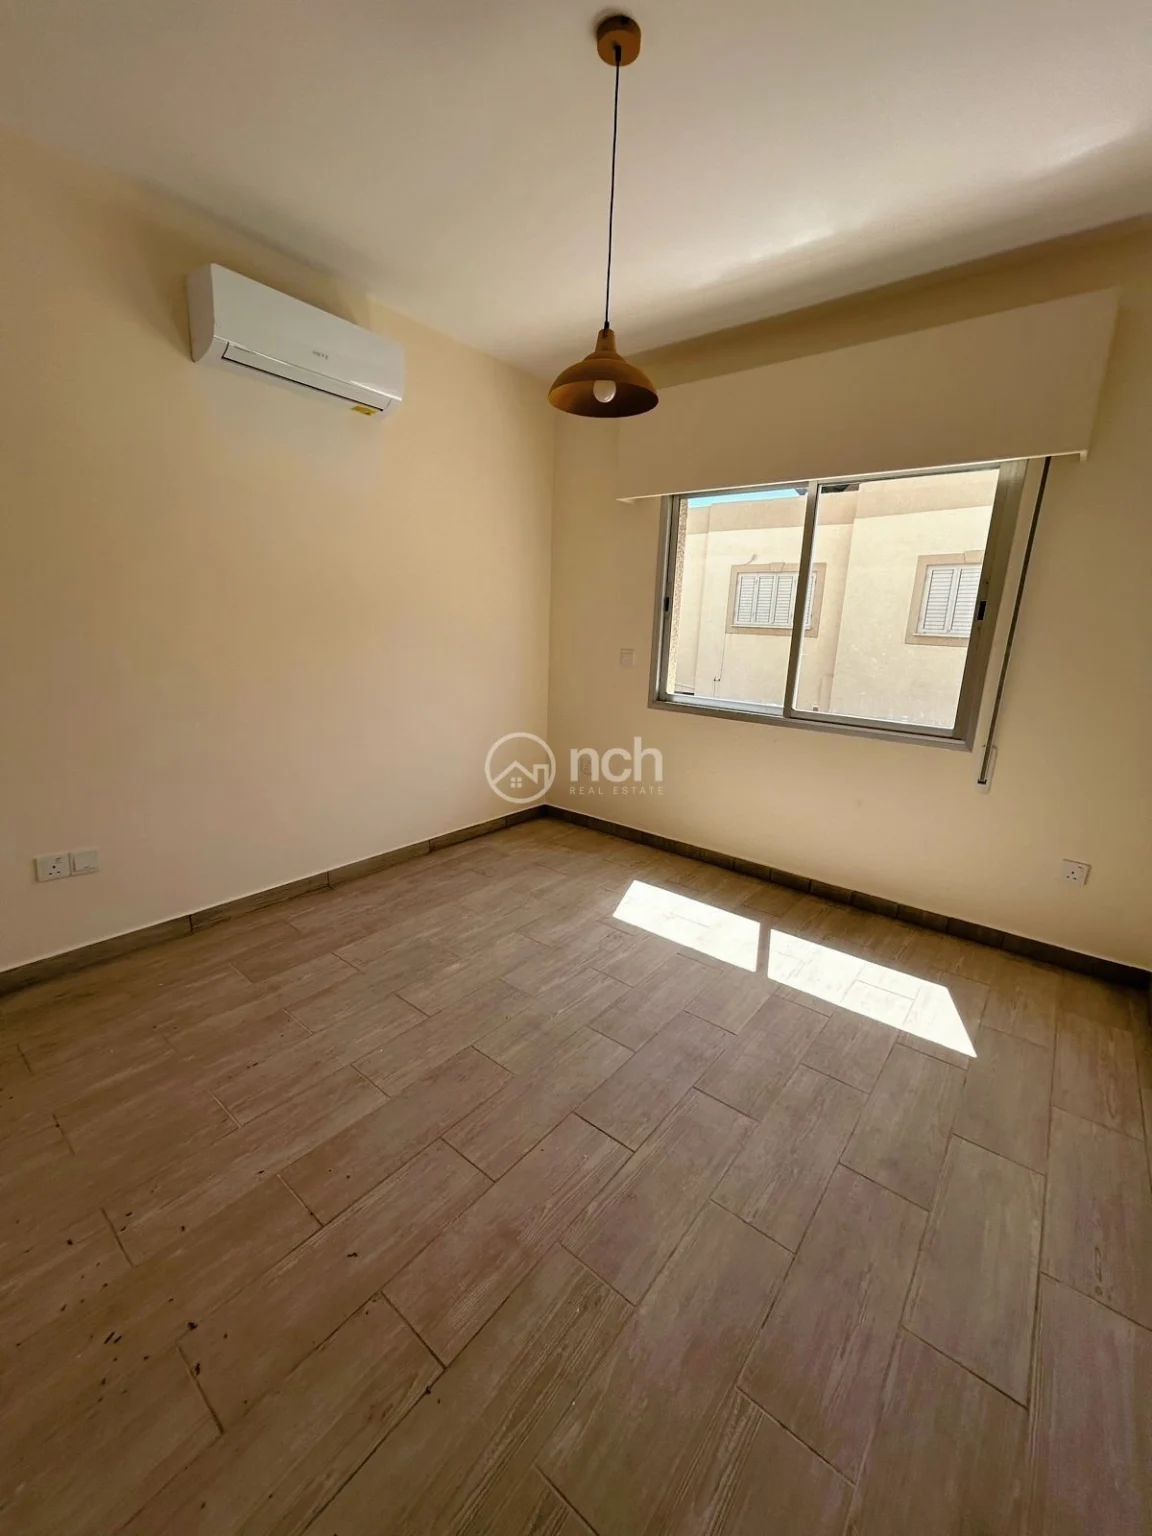 3 Bedroom Apartment for Rent in Limassol – Mesa Geitonia